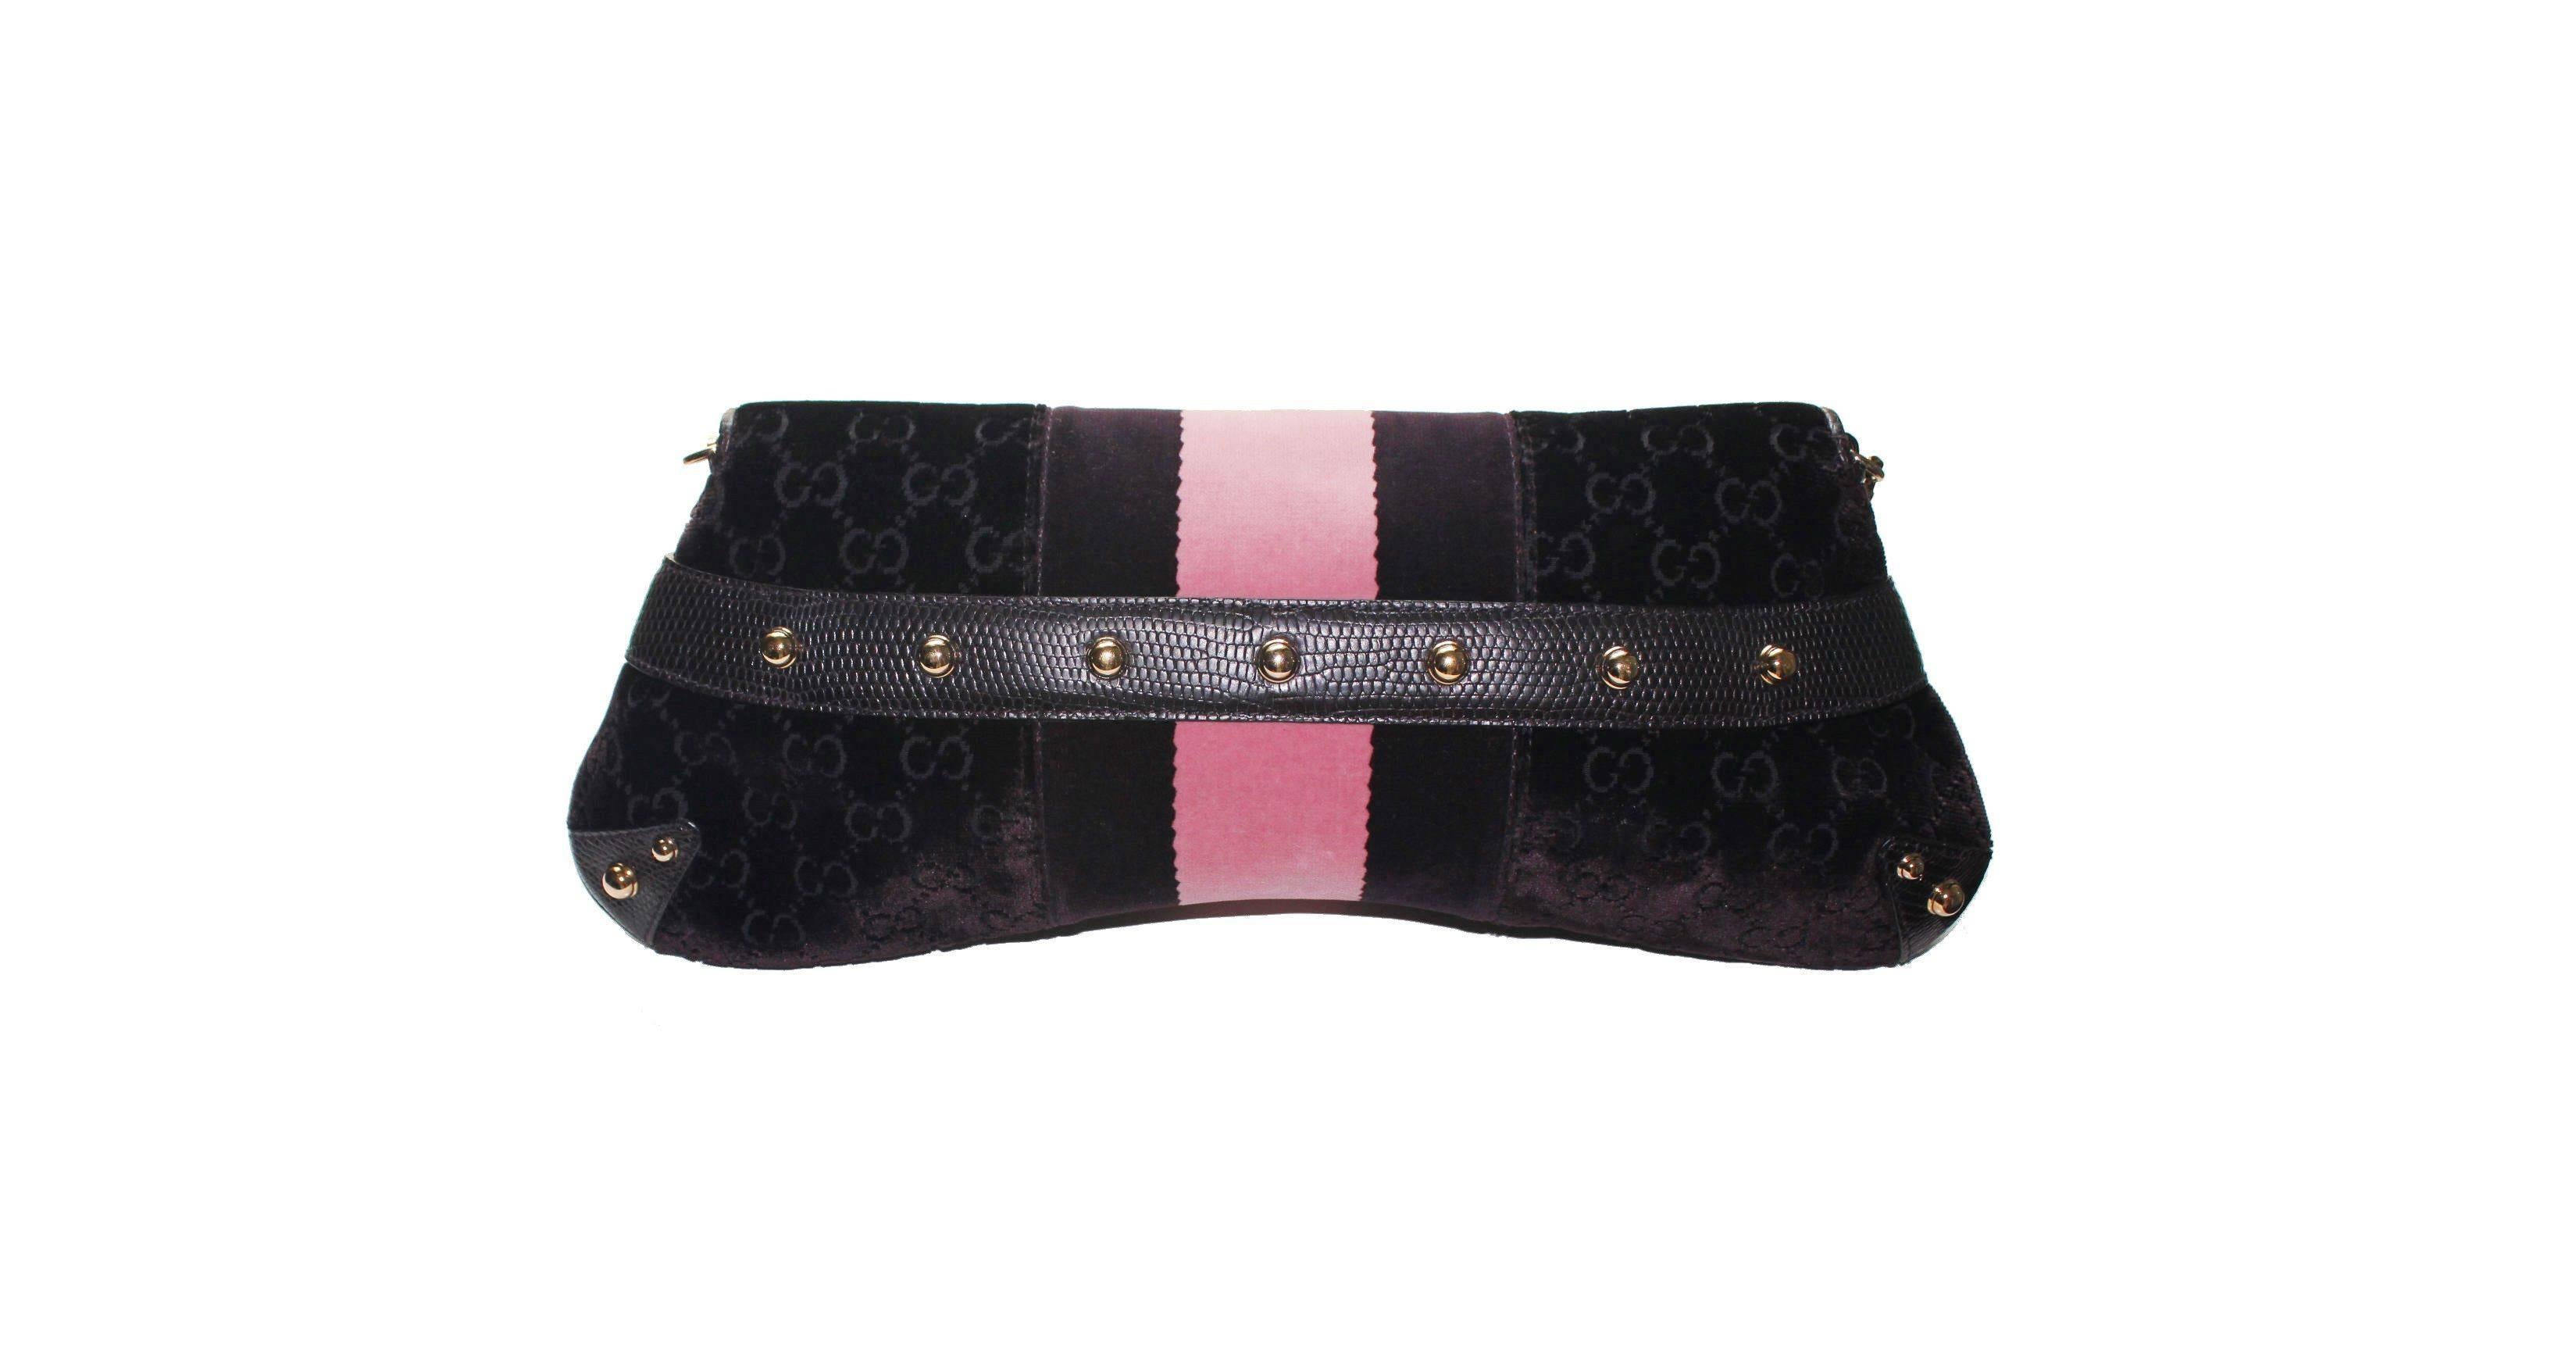 A Gucci by Tom Ford Evening Bag

Limited Edition only sold in selected Gucci flagship stores
Beautiful eggplant velvet with the famous GG logo monogram
Exotic lizard skin trimmings - no print!
Famous Gucci signature horsebit design
Velvet web